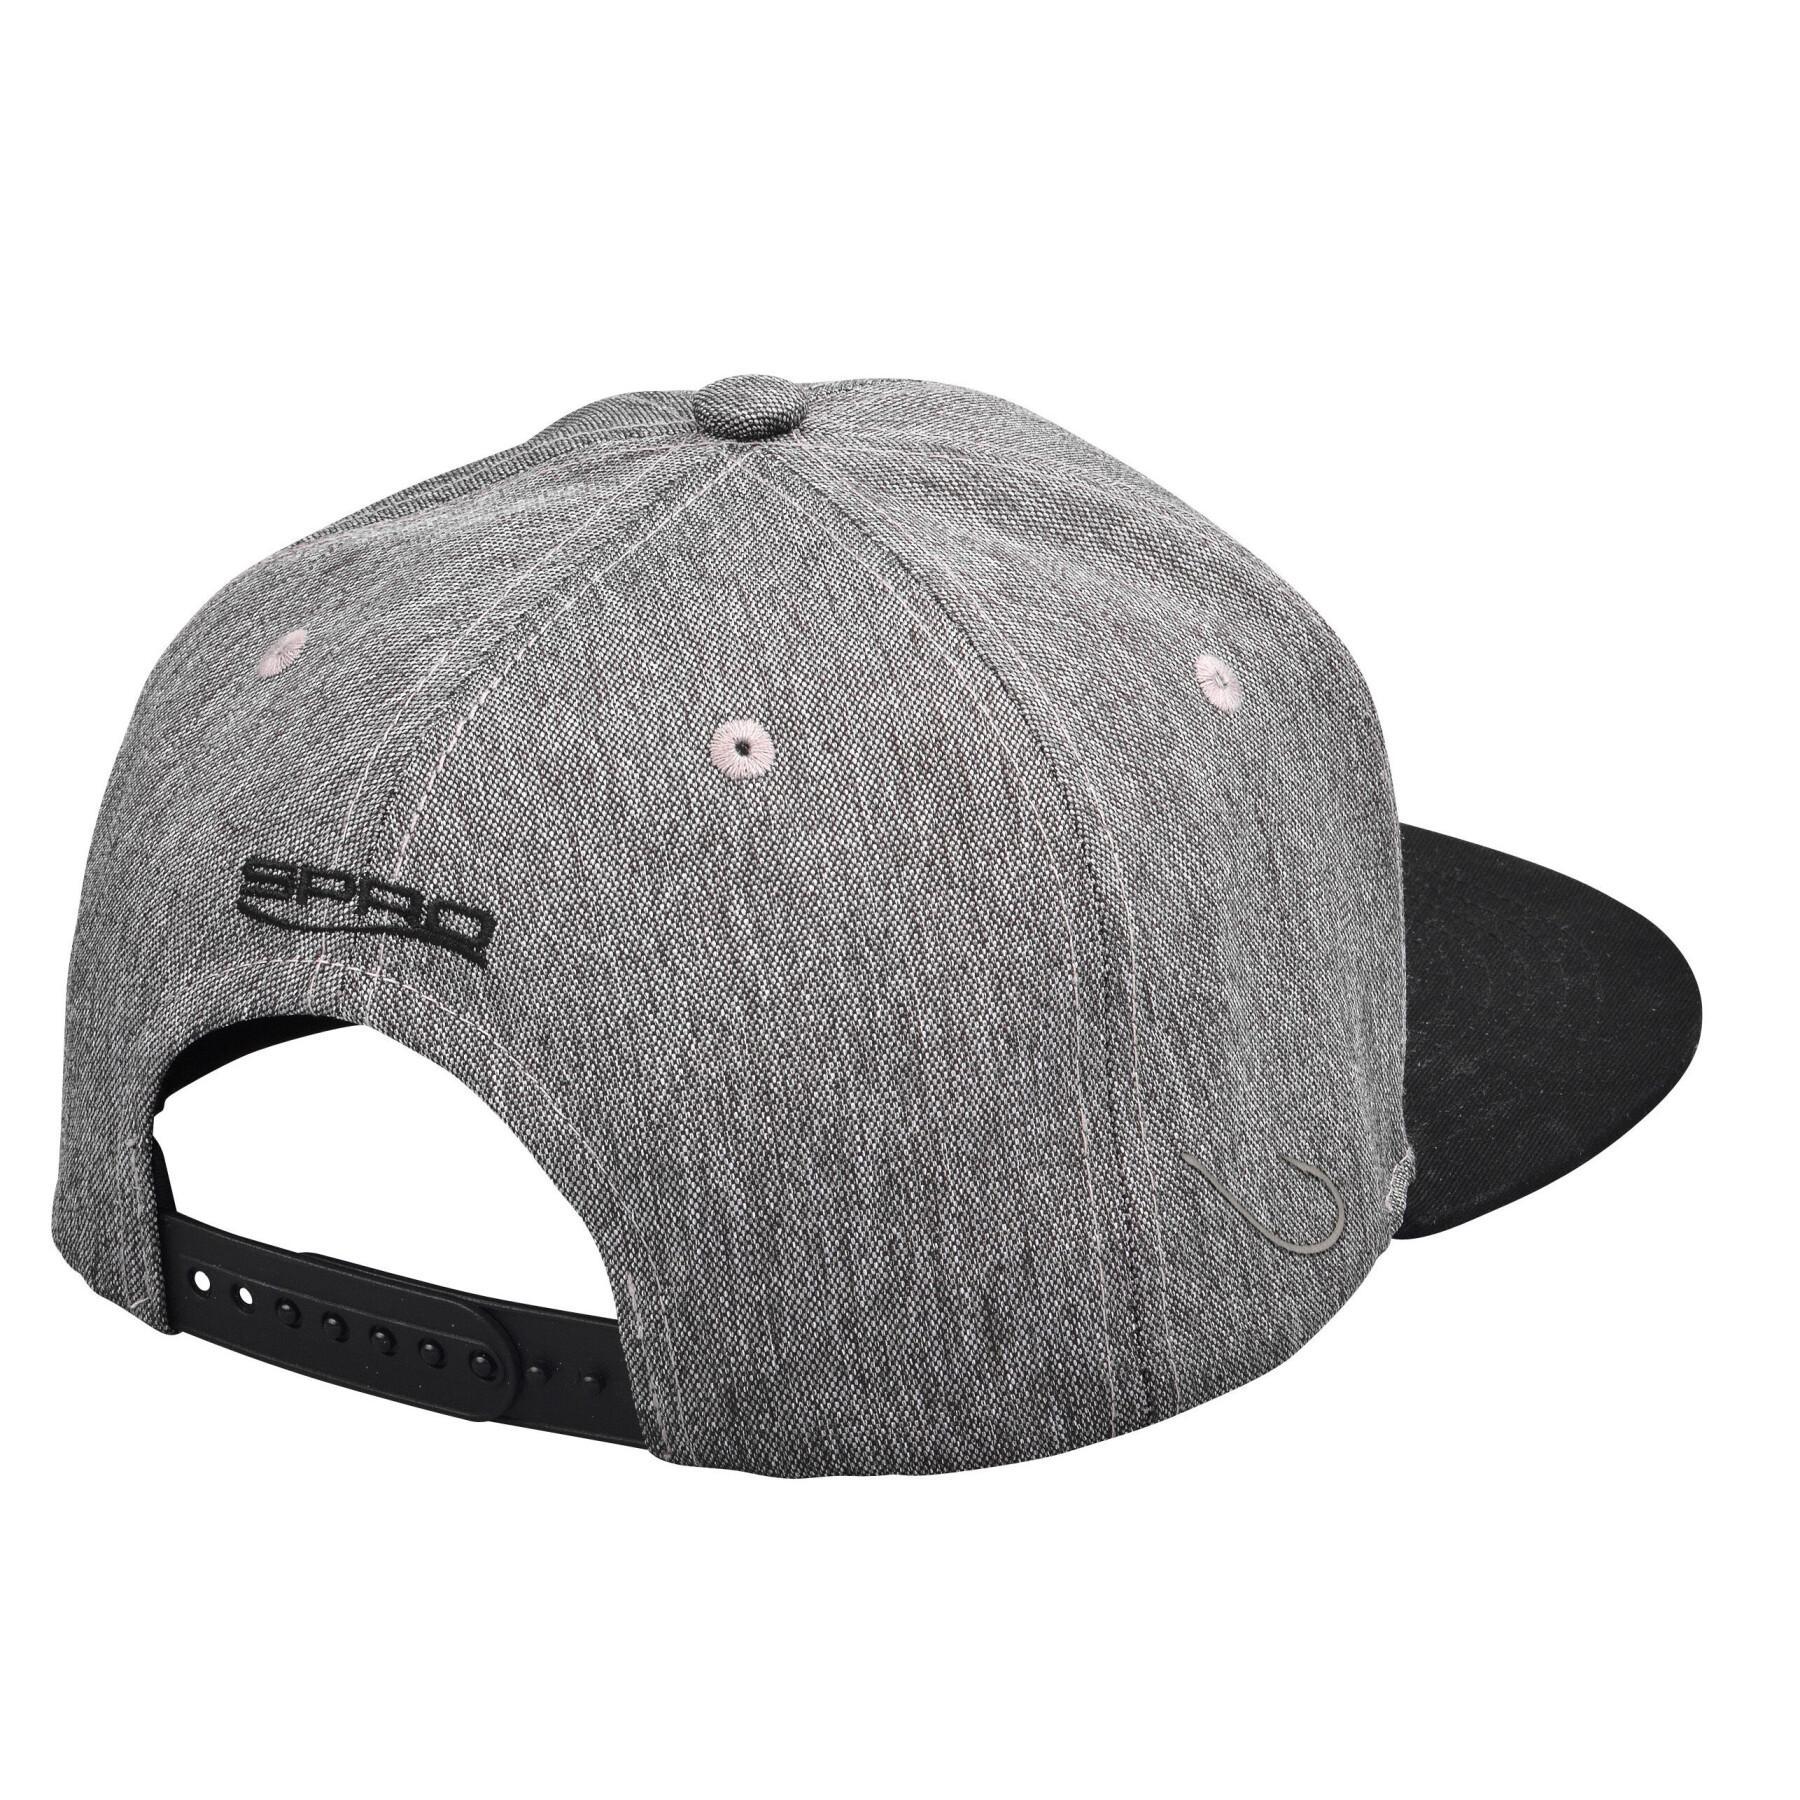 Casquette Spro FreeStyle Flat